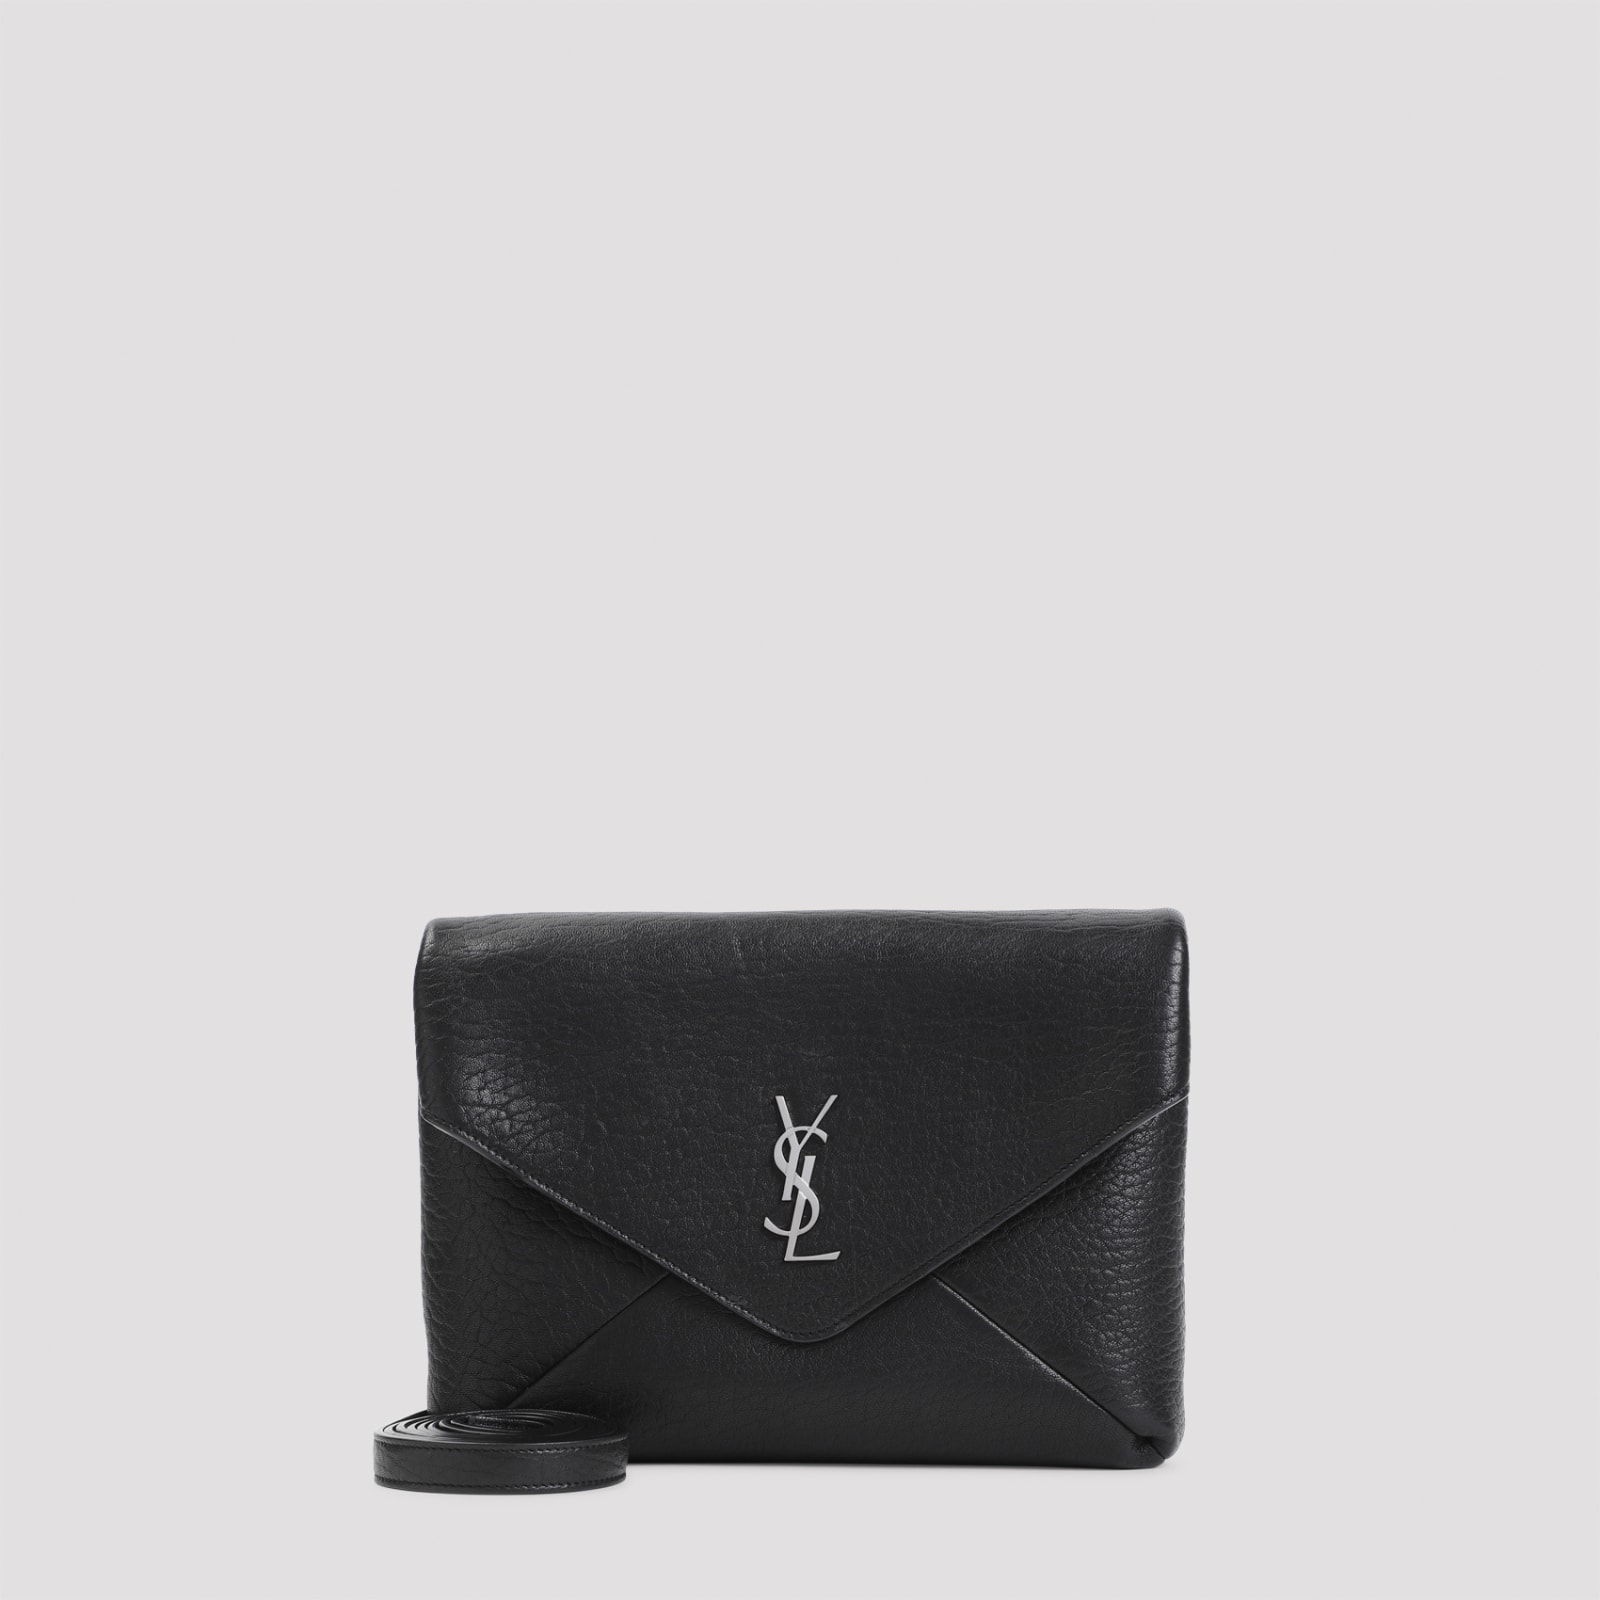 Ysl Large Pouch On Strap